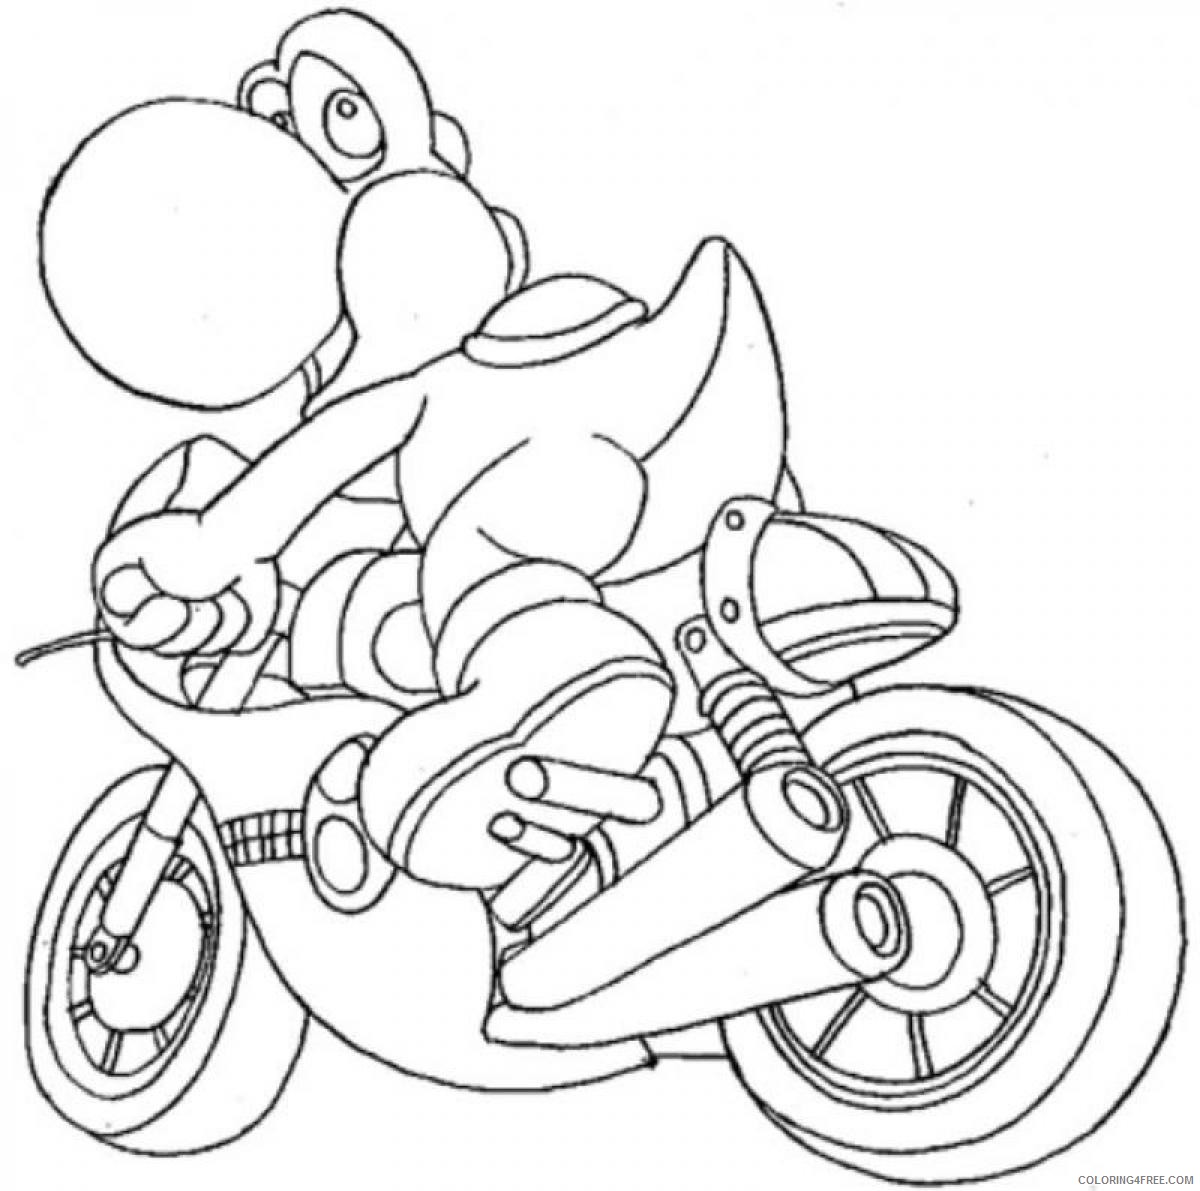 yoshi coloring pages riding motorcycle Coloring4free